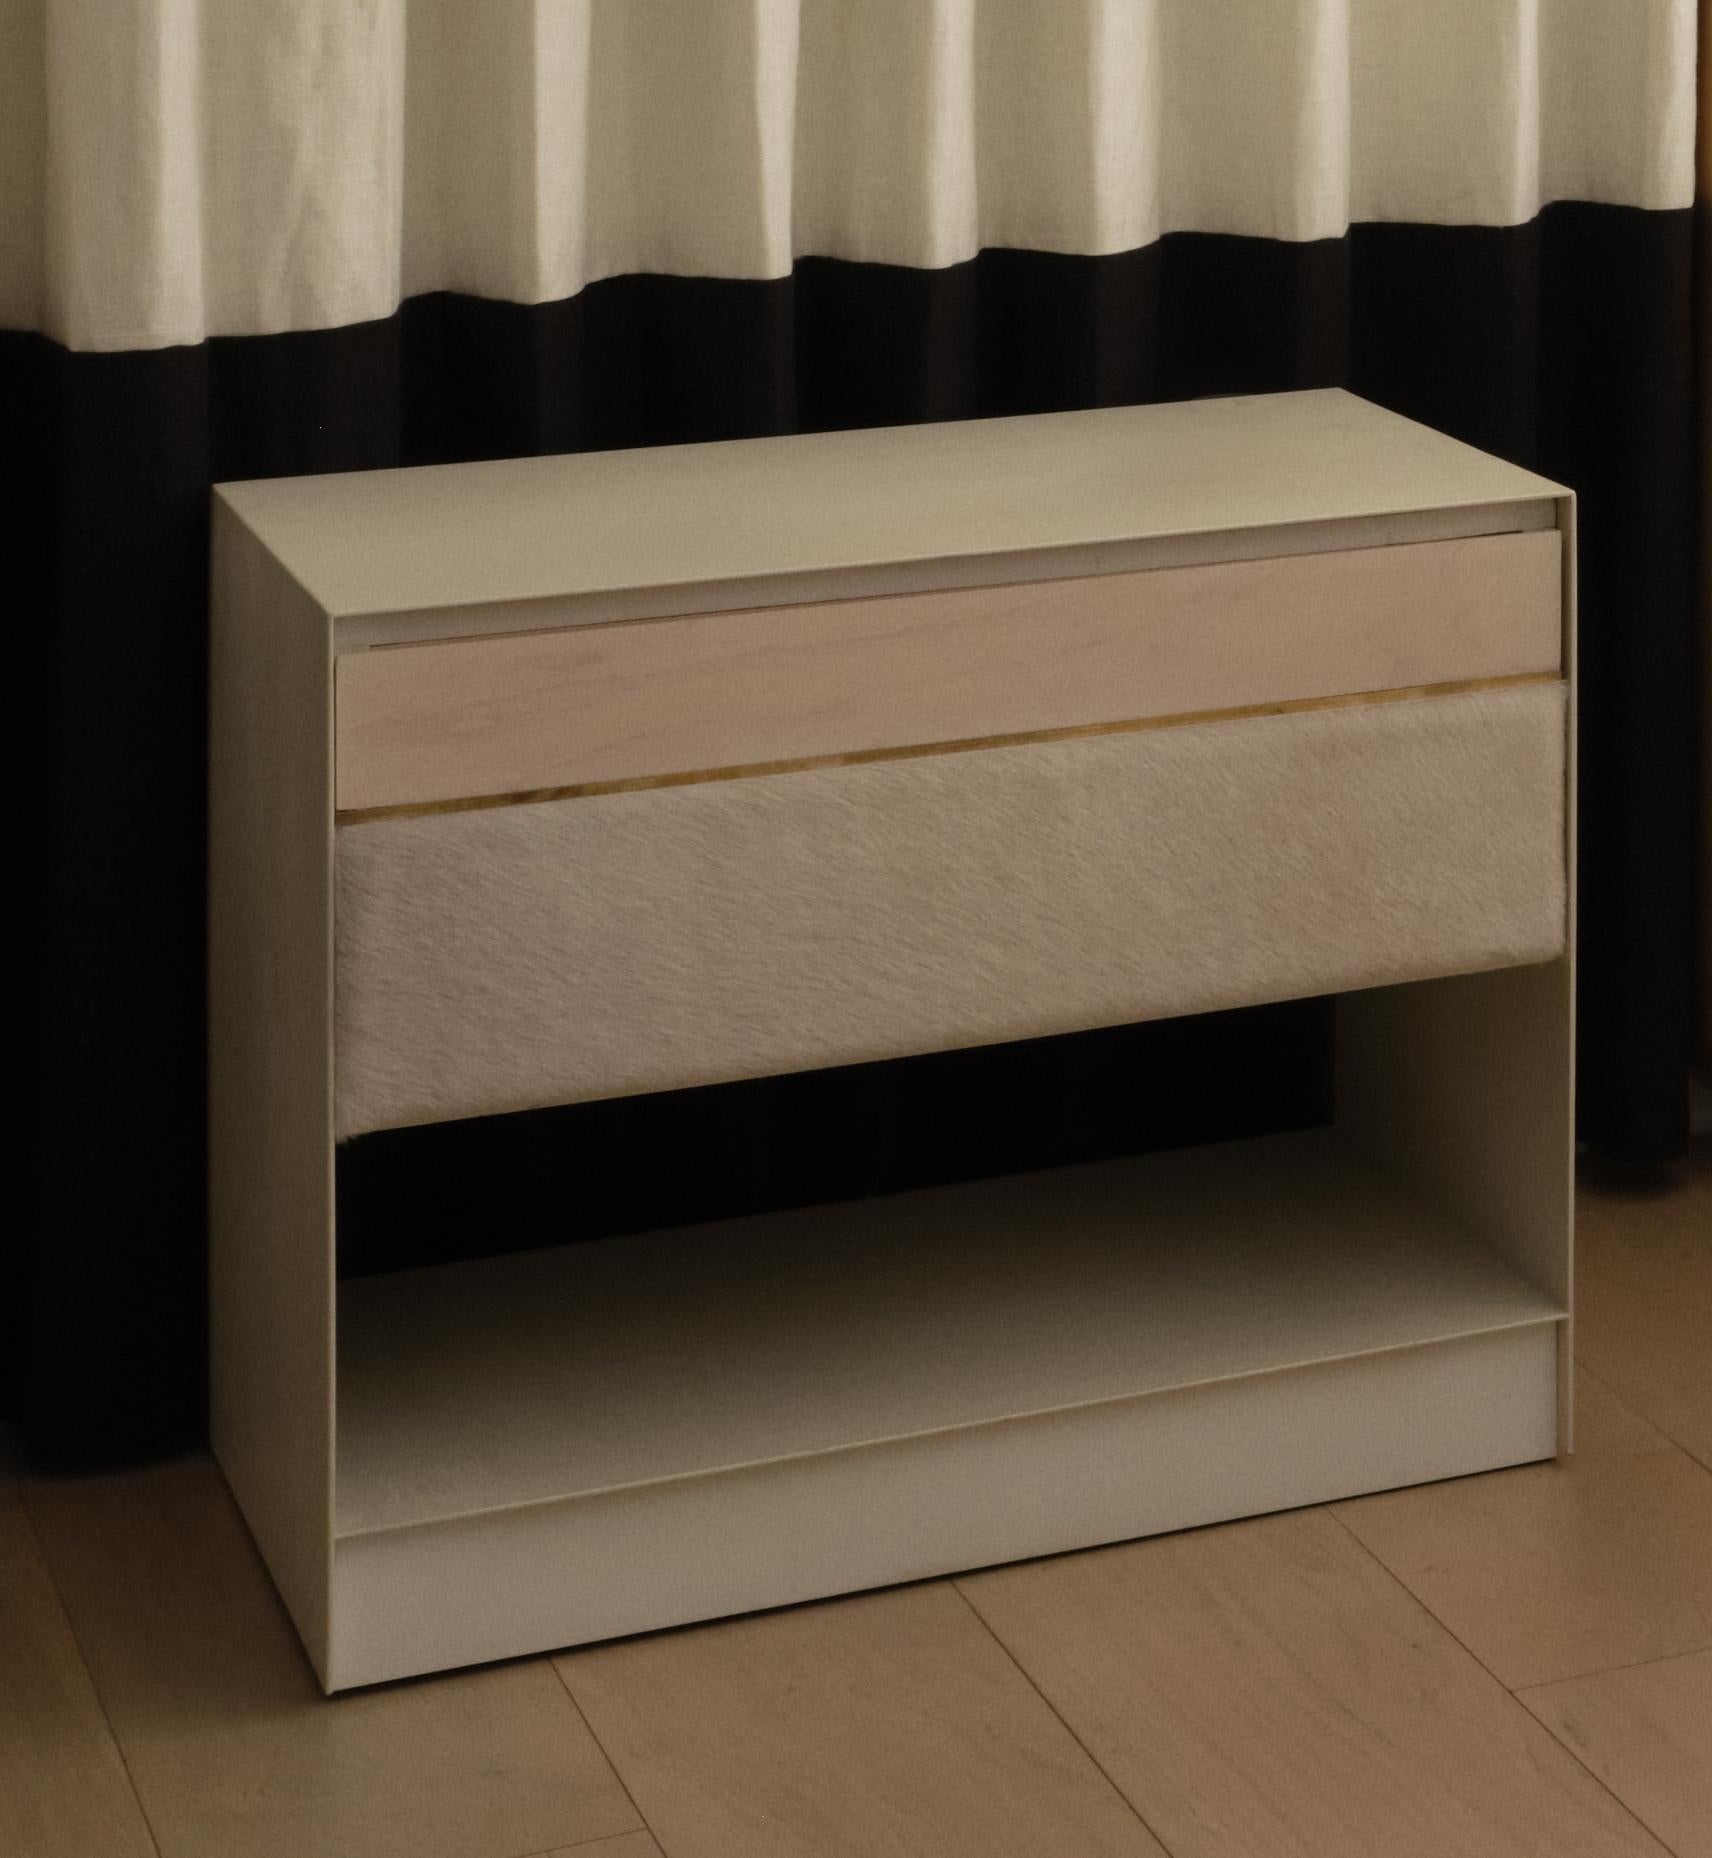 Introducing the Maz Nightstand. Designed and meticulously hand-crafted in Los Angeles by Studio Qasabian. 

Made-to-Order Excellence: Maz is a testament to bespoke craftsmanship, and can be tailored to your individual preferences. Includes operable